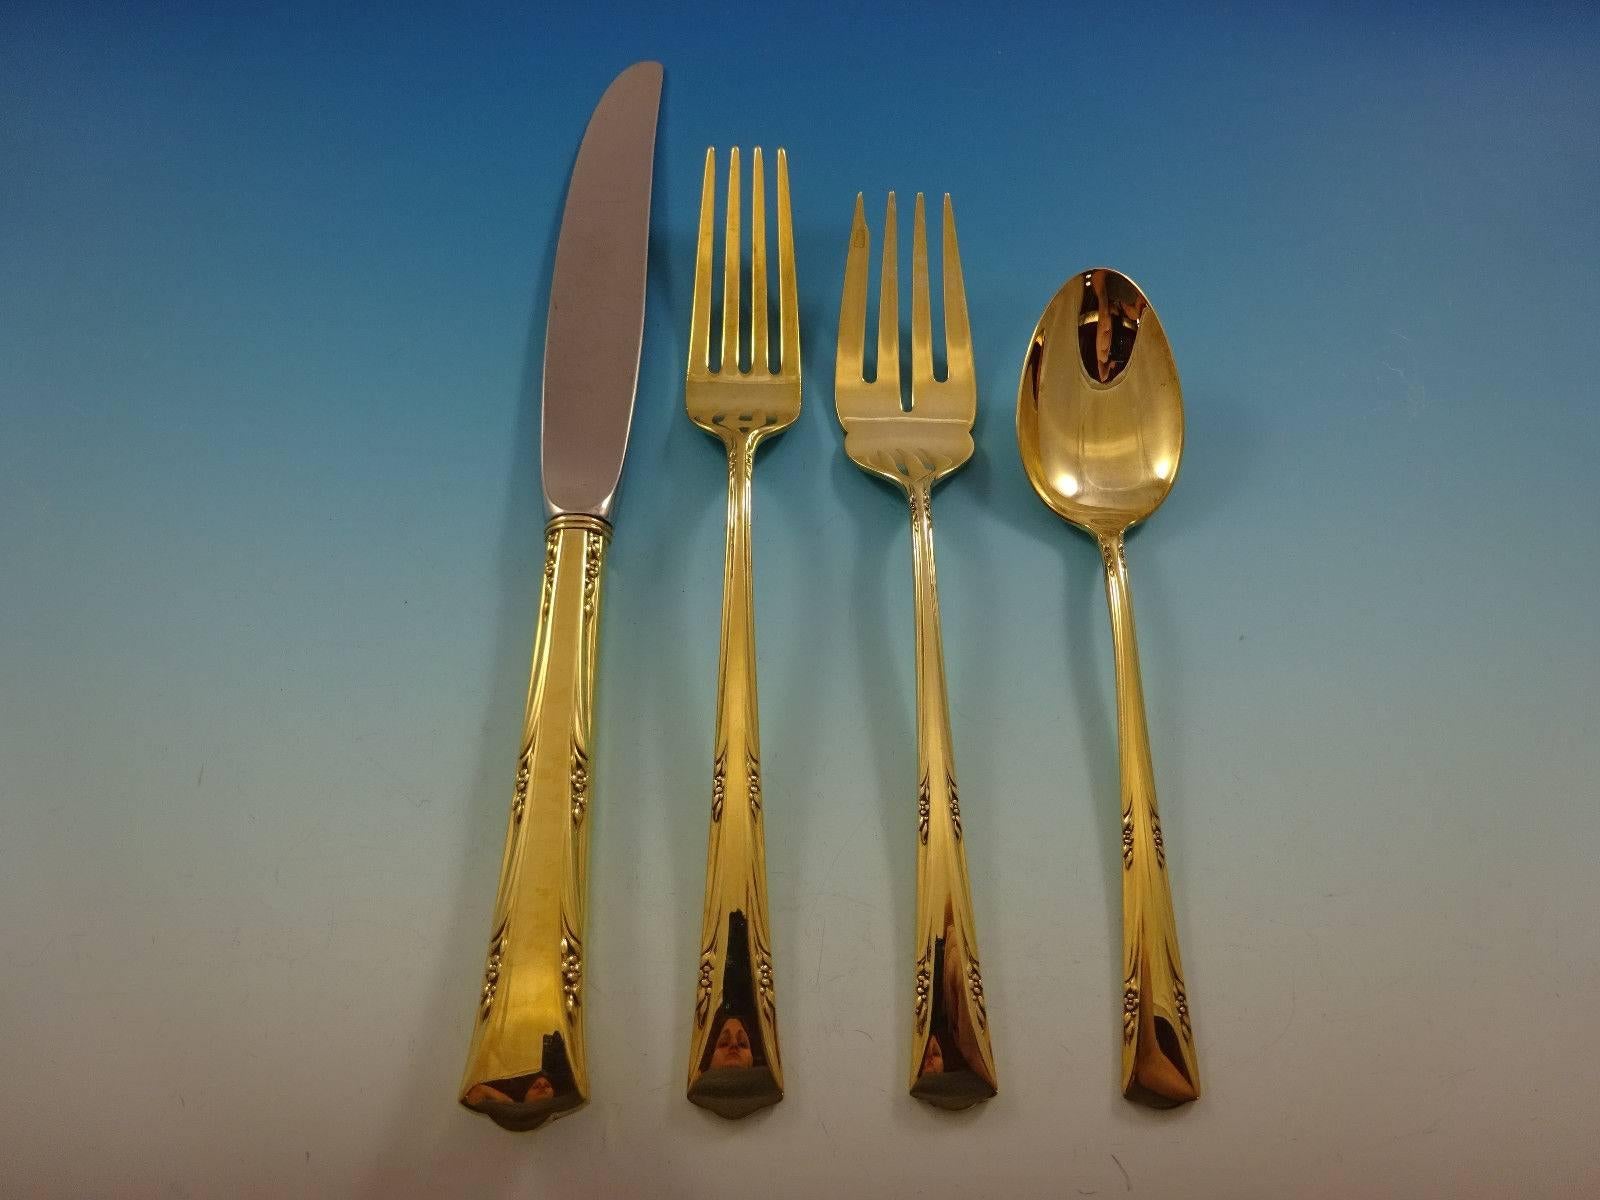 Greenbrier by Gorham sterling silver flatware set of 32 pieces. Gold flatware is on trend and makes a bold statement on your table, especially when paired with gold rimmed china and gold accents.

This set is vermeil (completely gold-washed) and